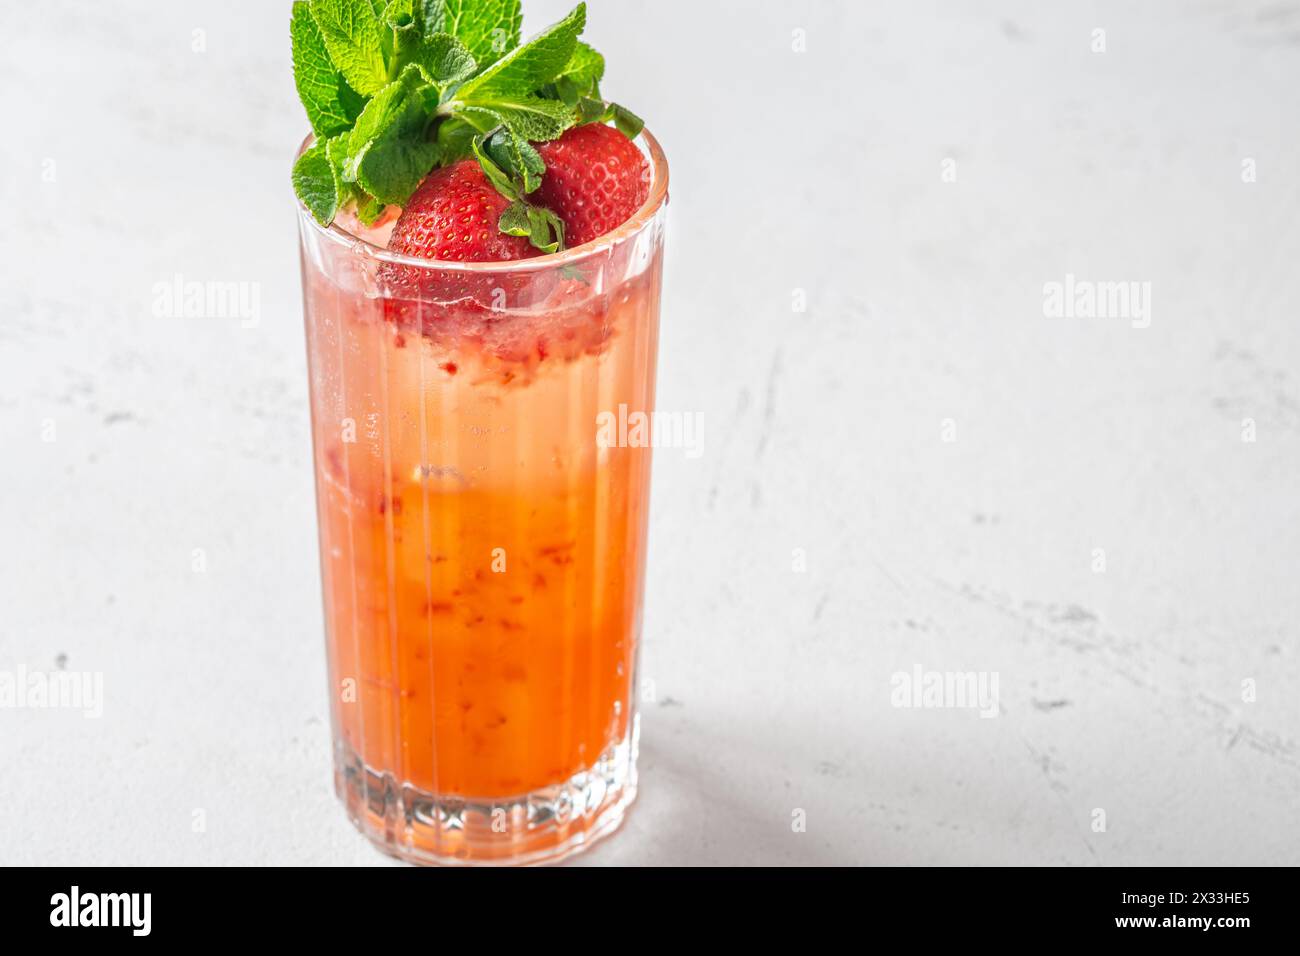 Glass of Courtside cocktail garnished with mint sprigs Stock Photo